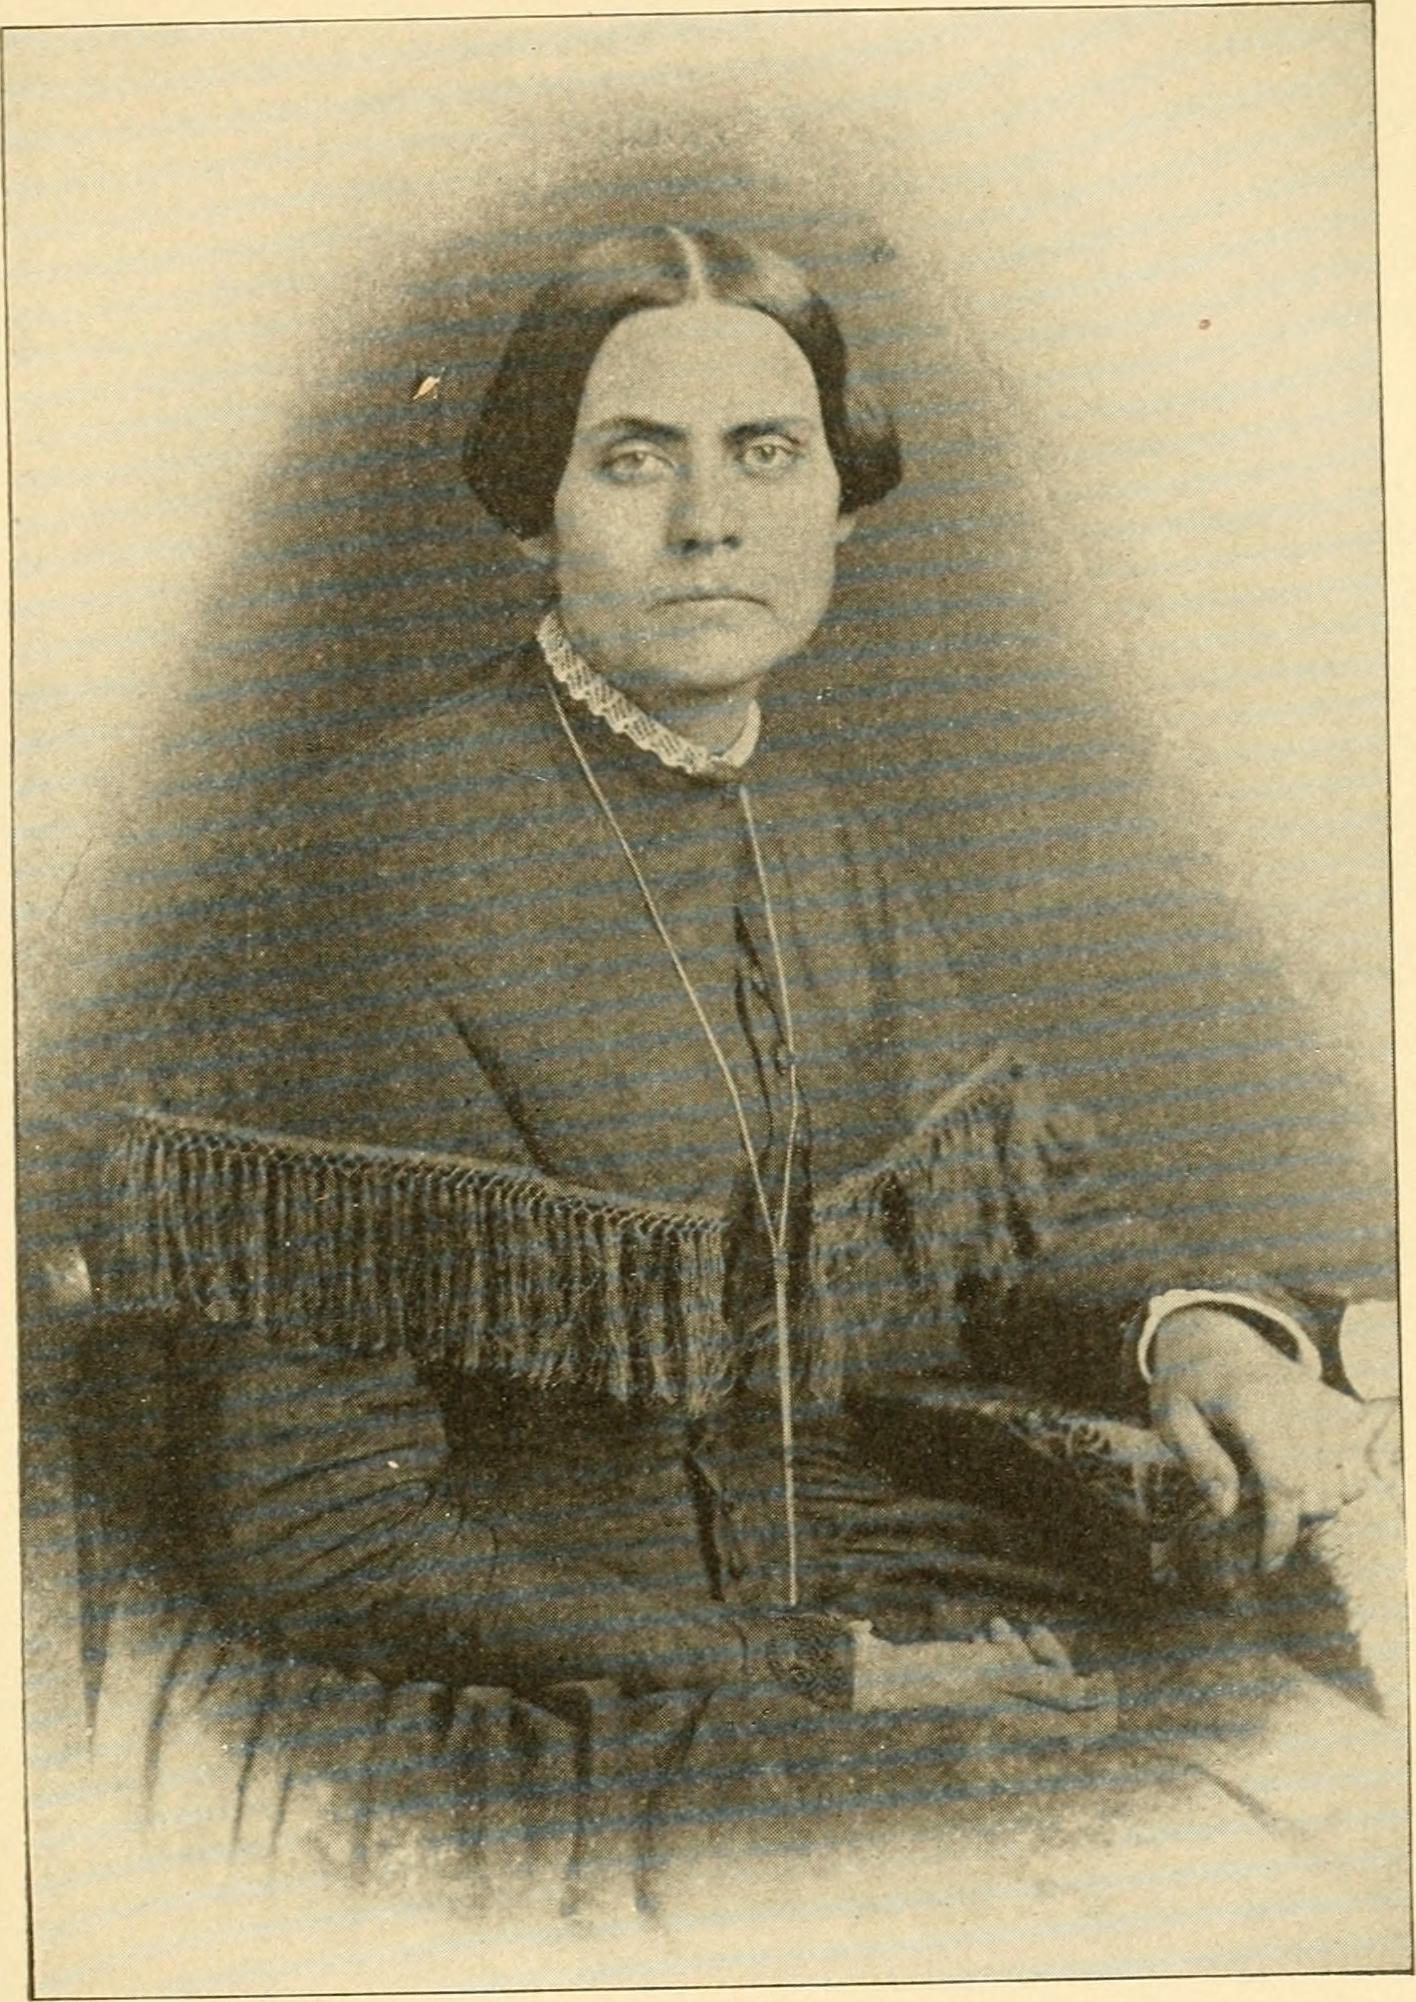 gives family background of Susan B.